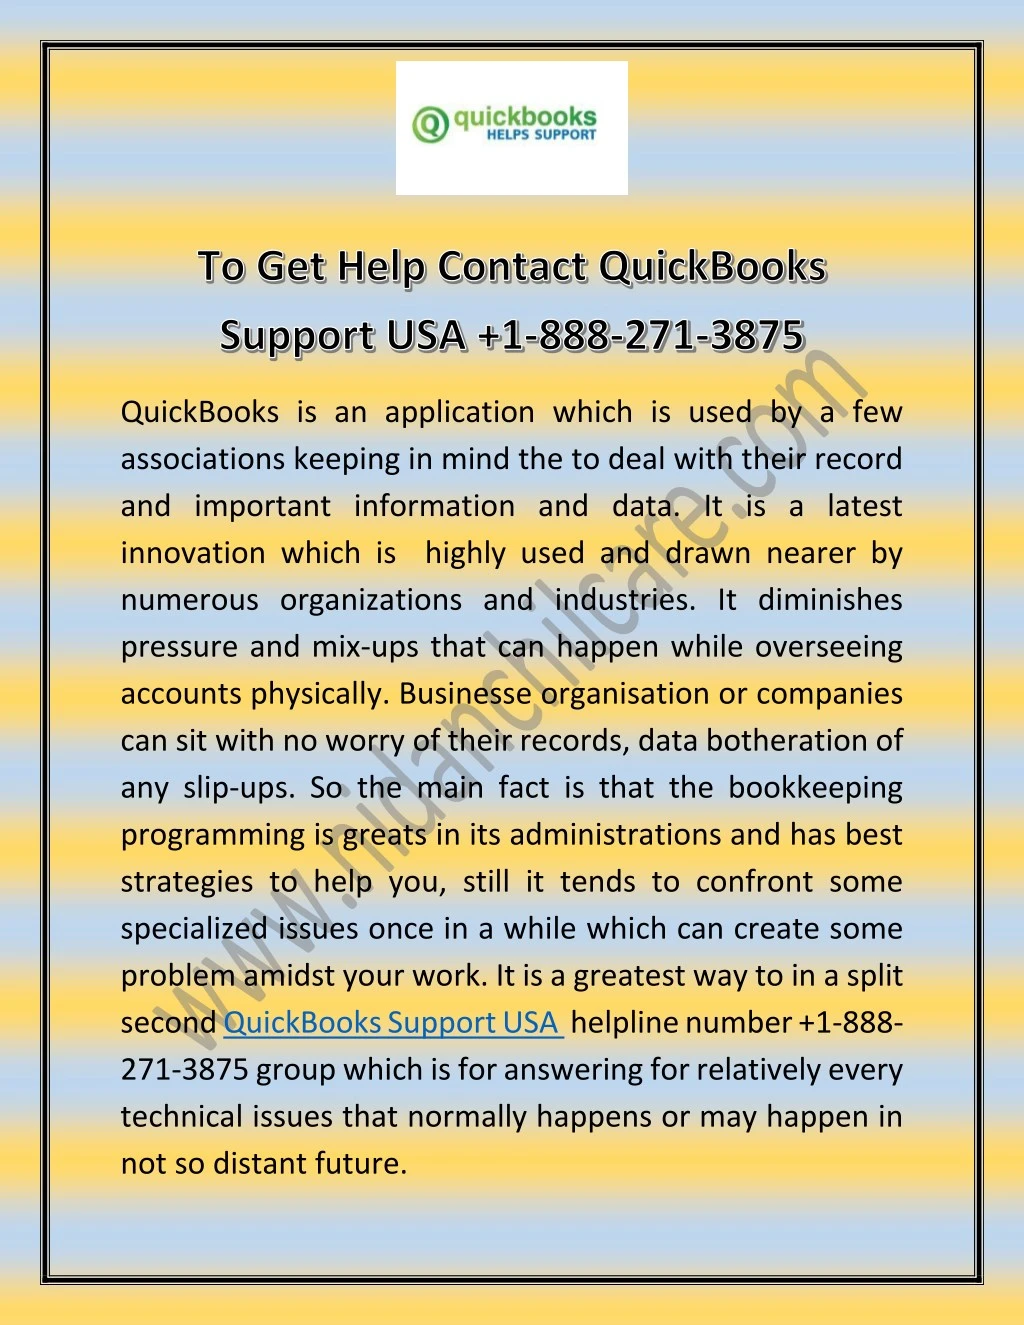 quickbooks is an application which is used